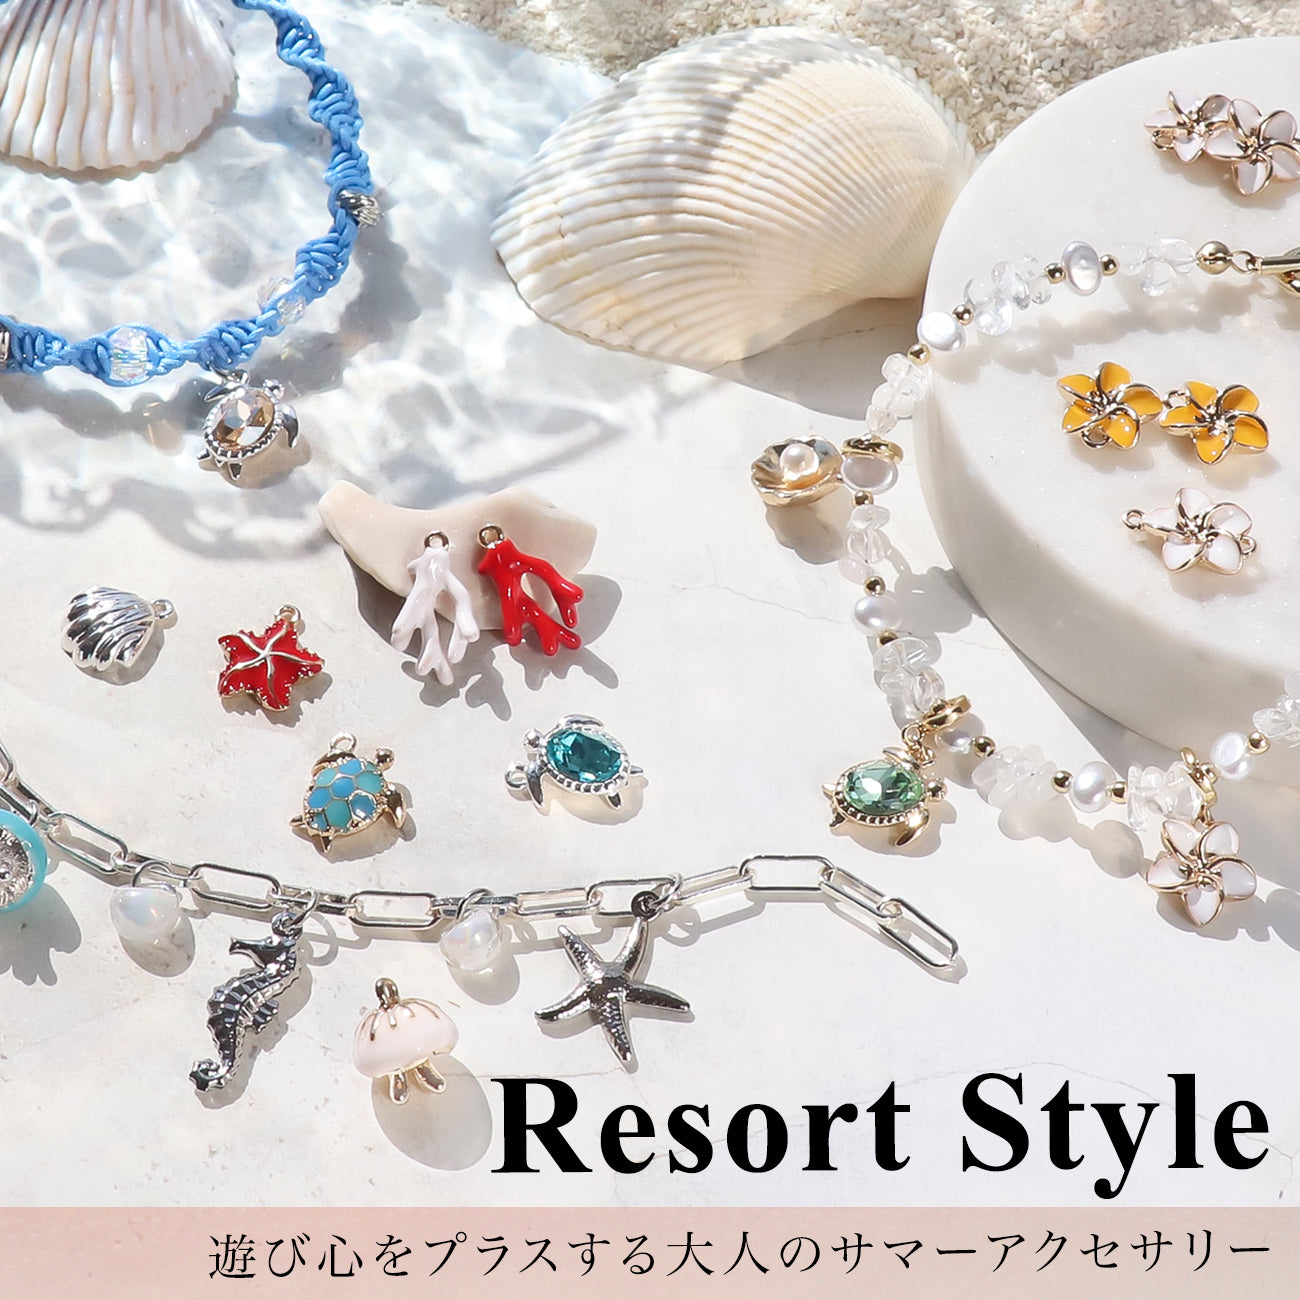 Resort style adult summer accessories that add playfulness